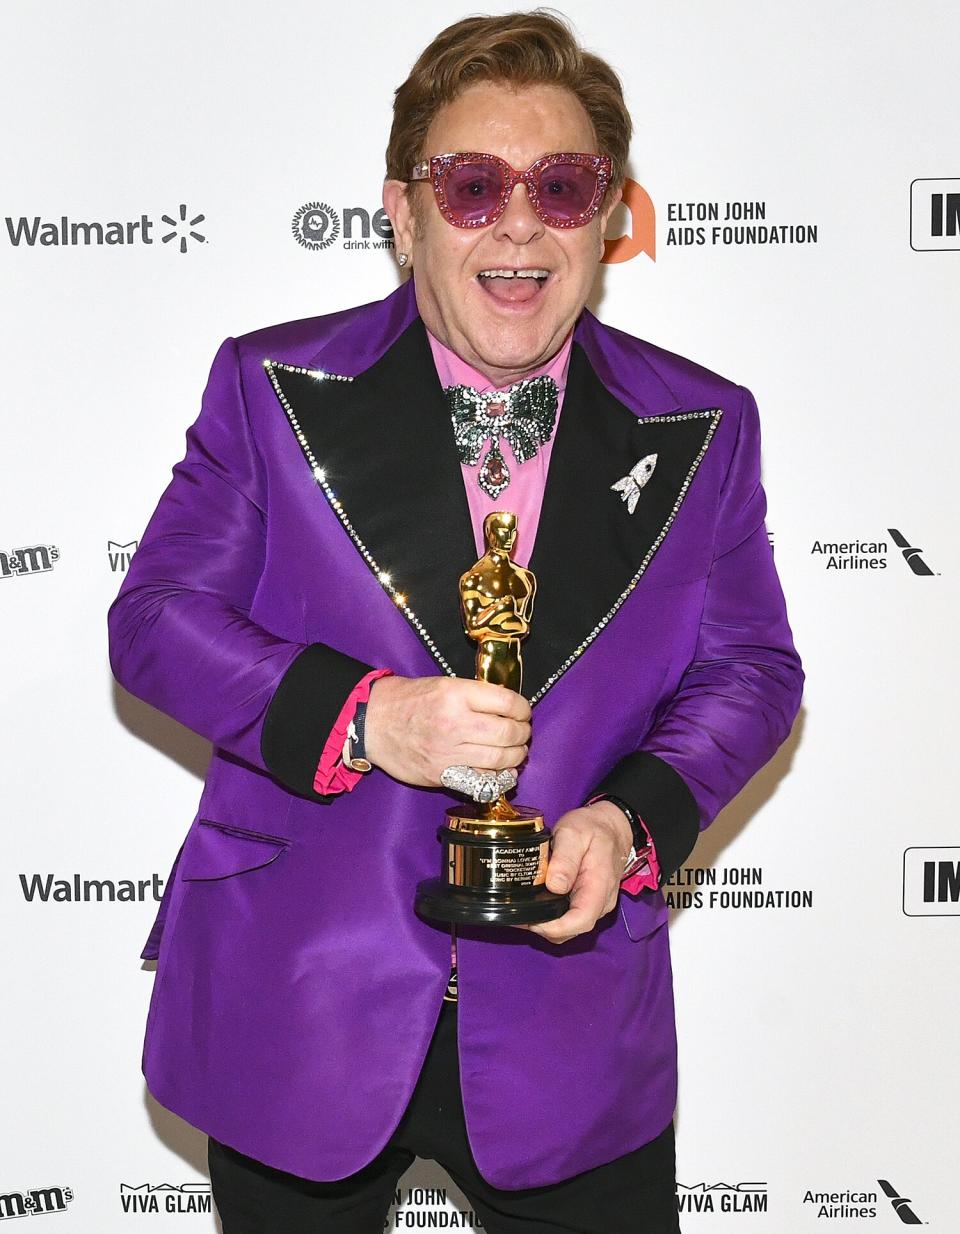 Elton John, who walked away with the award for Best Original Song, attends his 28th Annual AIDS Foundation Academy Awards Viewing Party. 